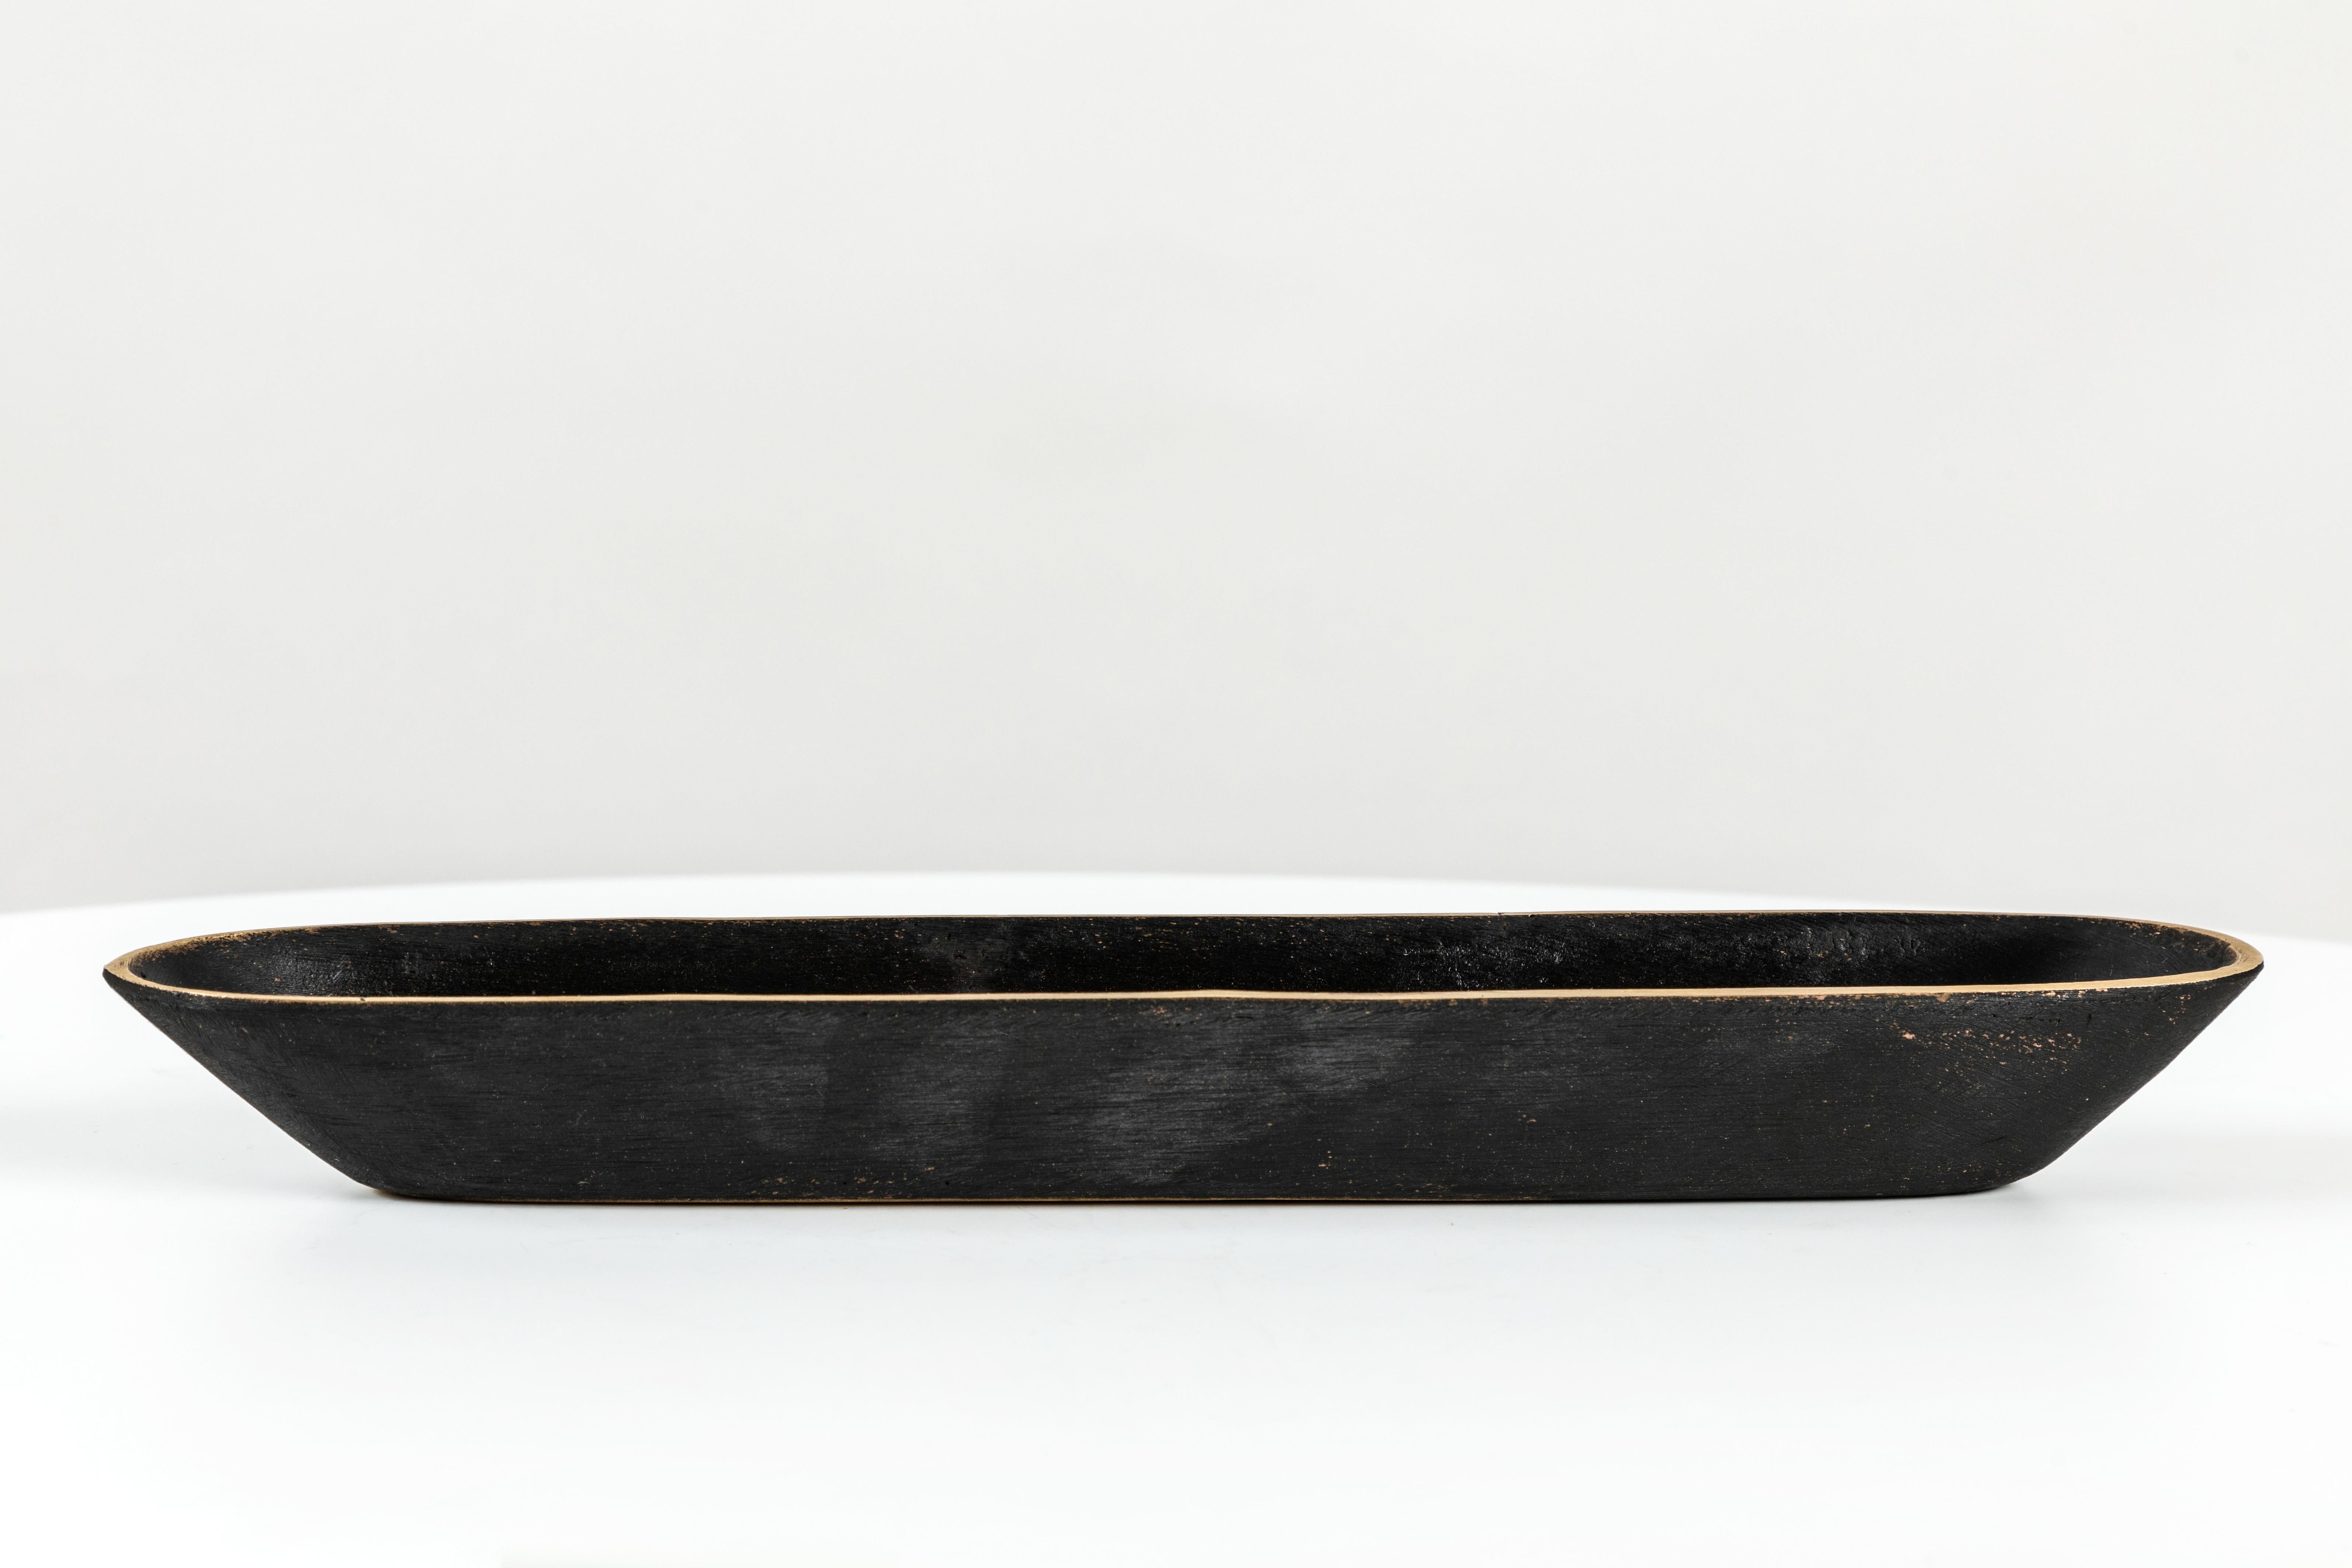 Carl Auböck Model #4317 brass bowl. Designed in the 1950s, this incredibly refined and sculptural Viennese bowl is executed in polished and darkly patinated brass. Originally conceived as a fountain pen holder, this decorative vessel can be used for